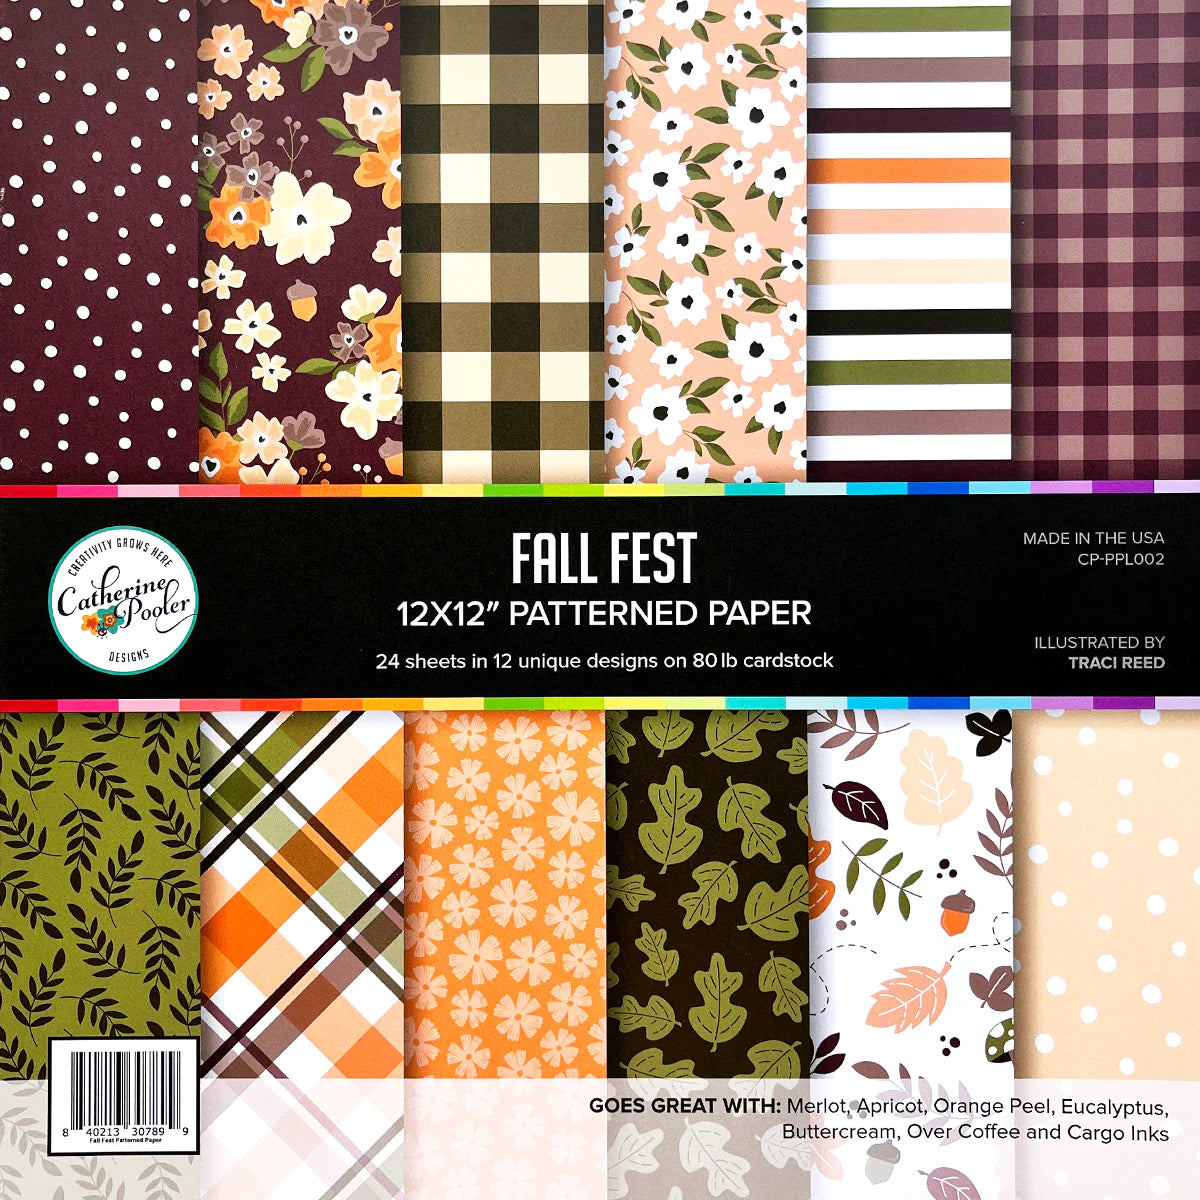 Fall Fest 12x12 Patterned Paper